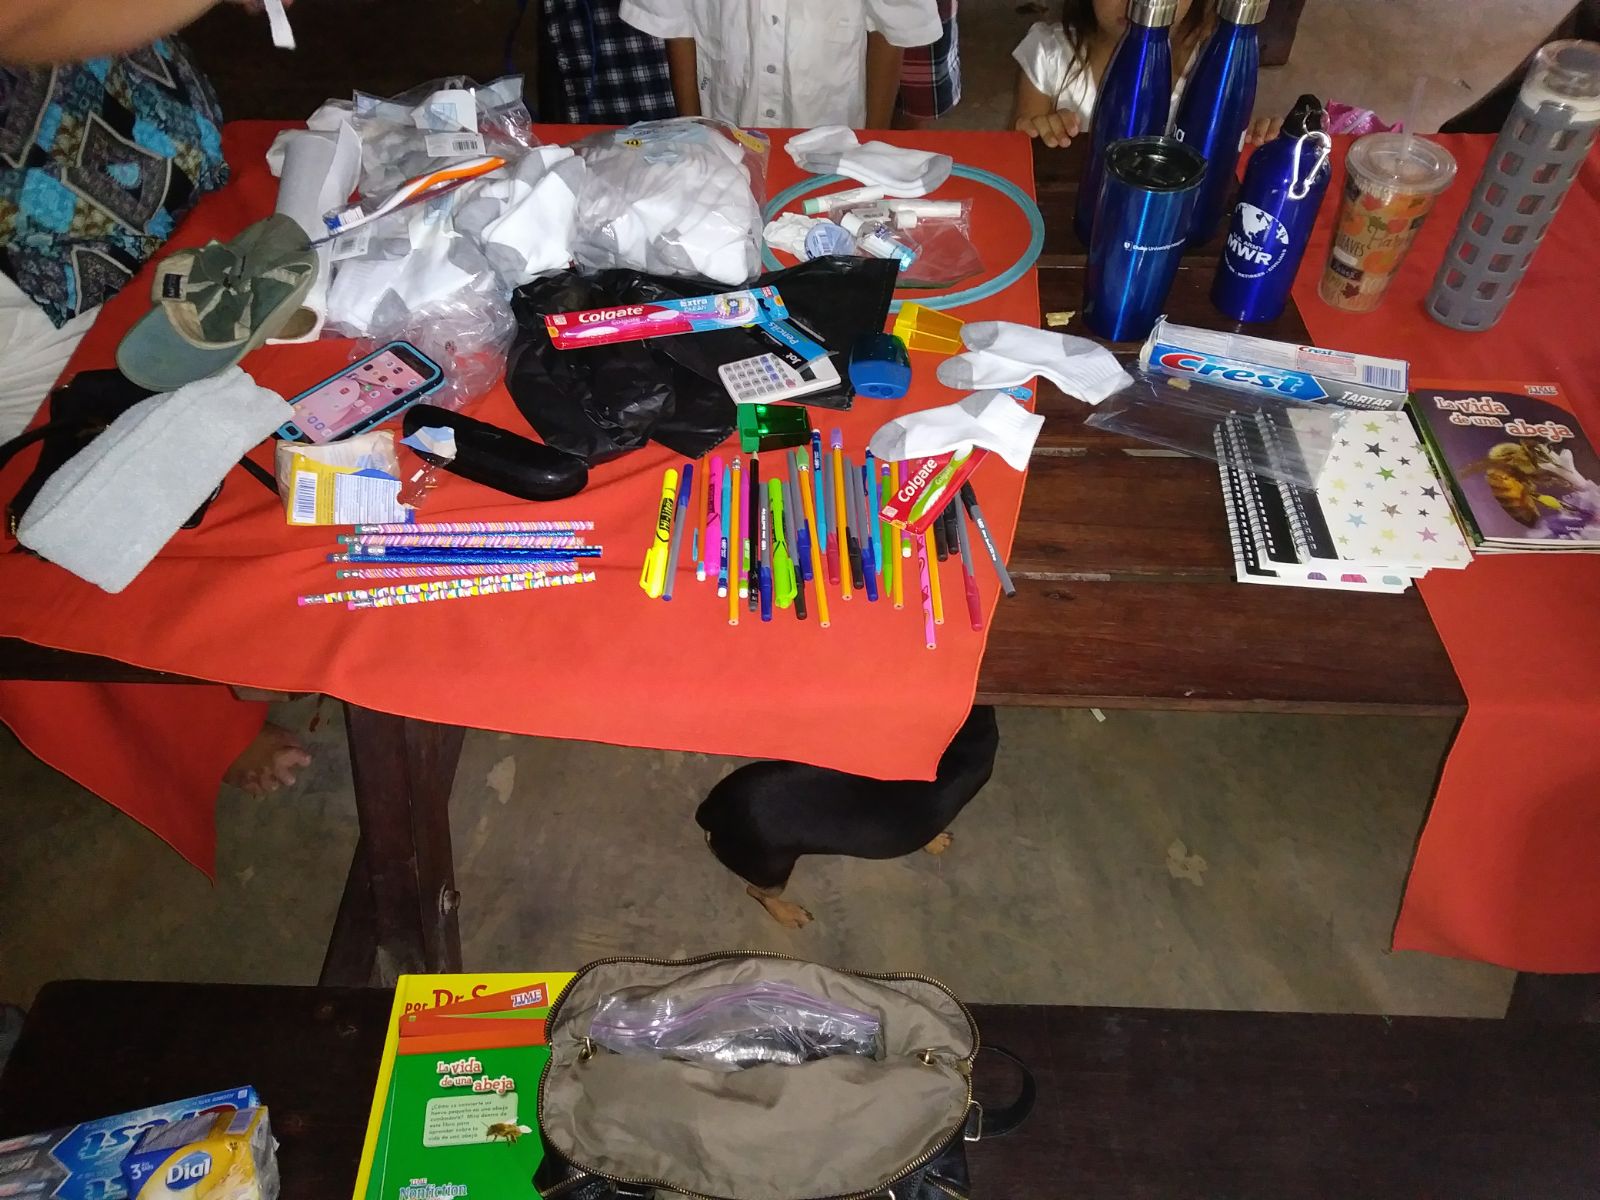 Donated school supplies from LiveGlobally 2017 for drake bay enrichment program in Costa Rica